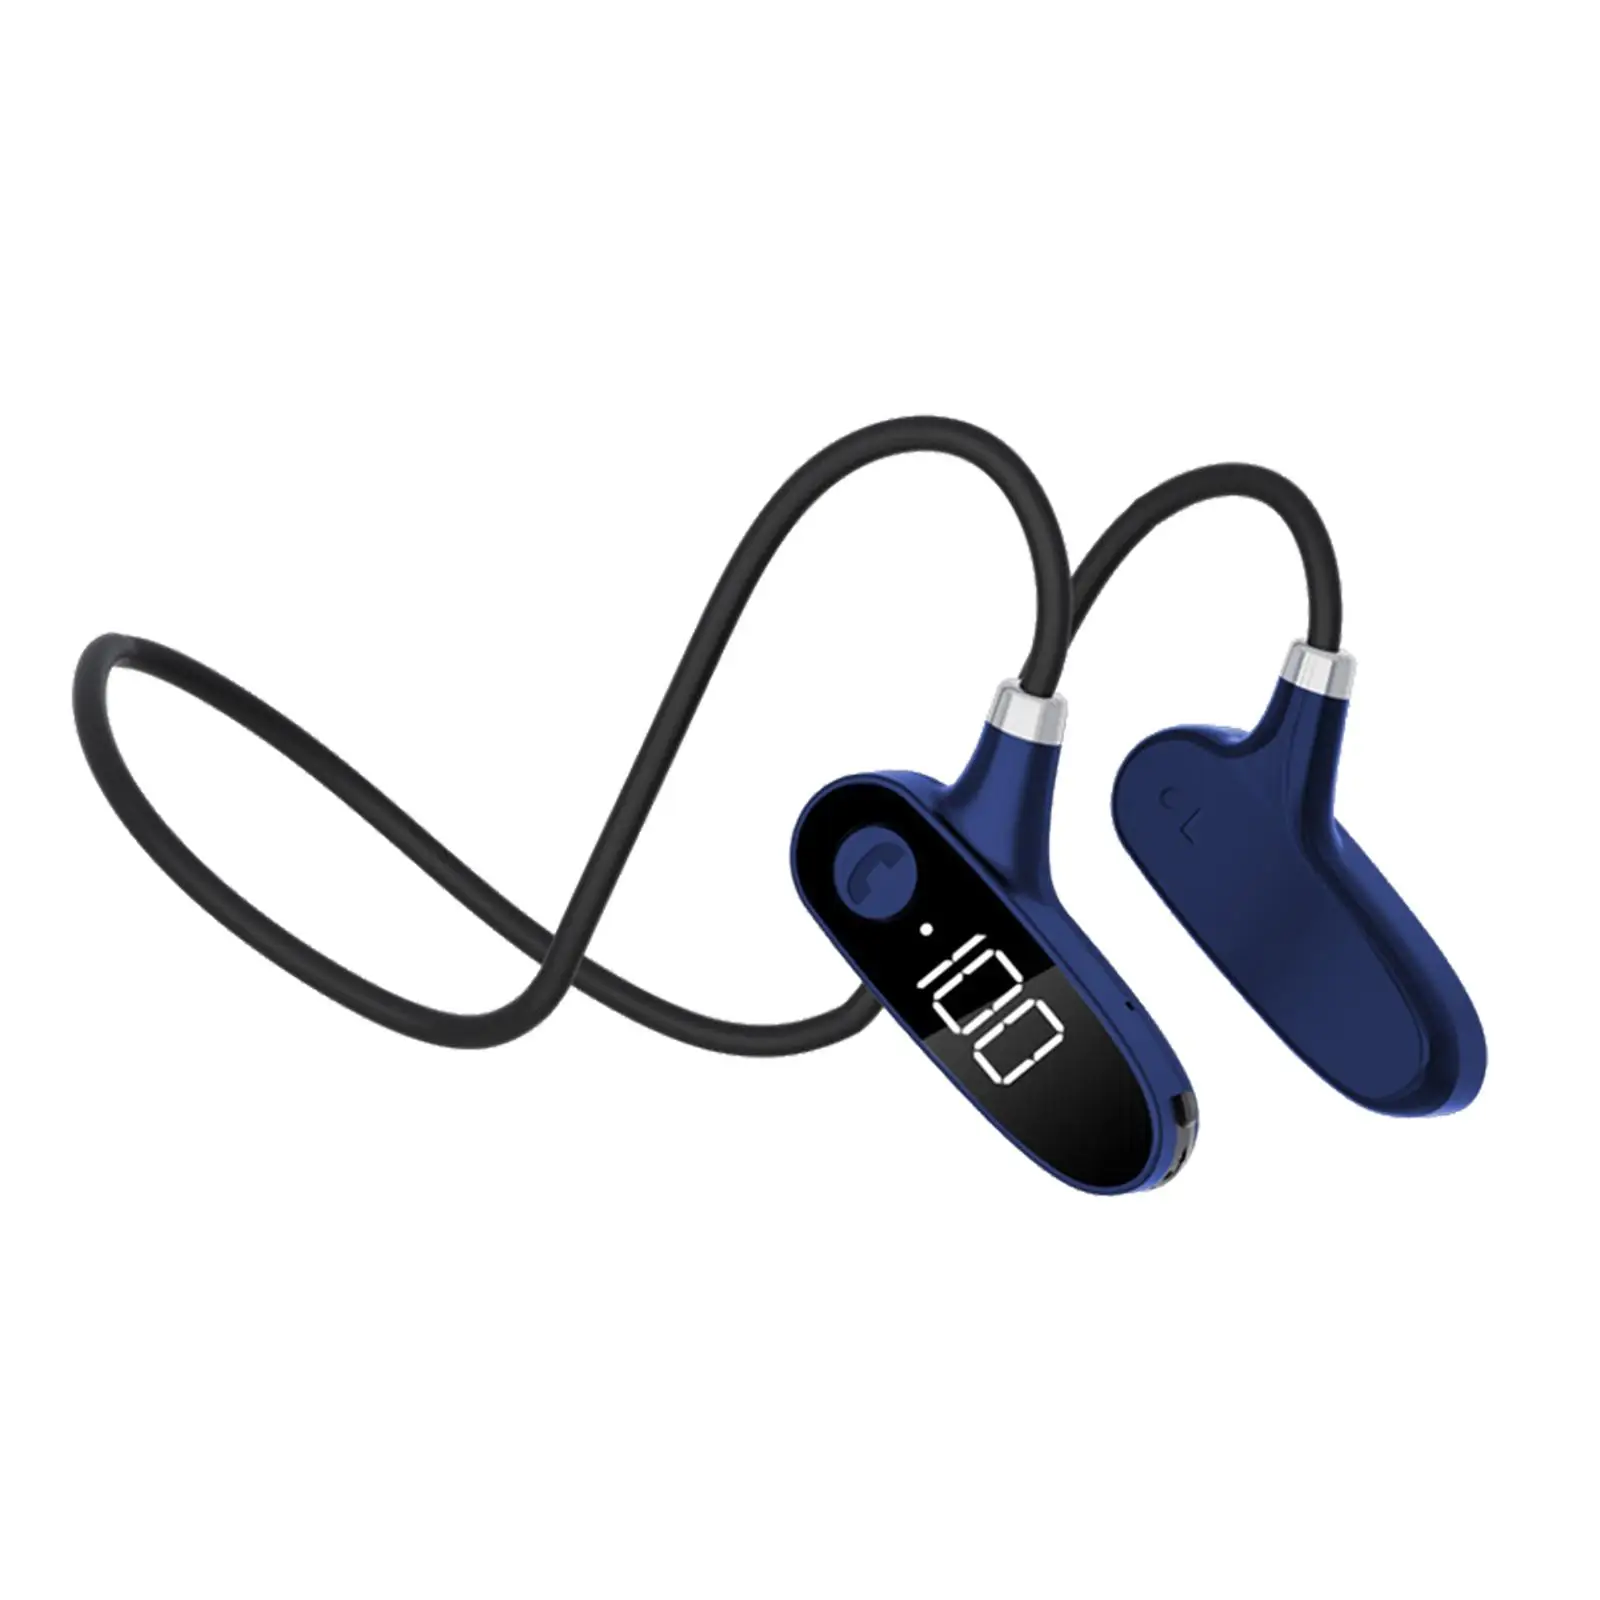  Conduction  5.2 Headphones Headsets Built-in Mic for Swimming Workouts